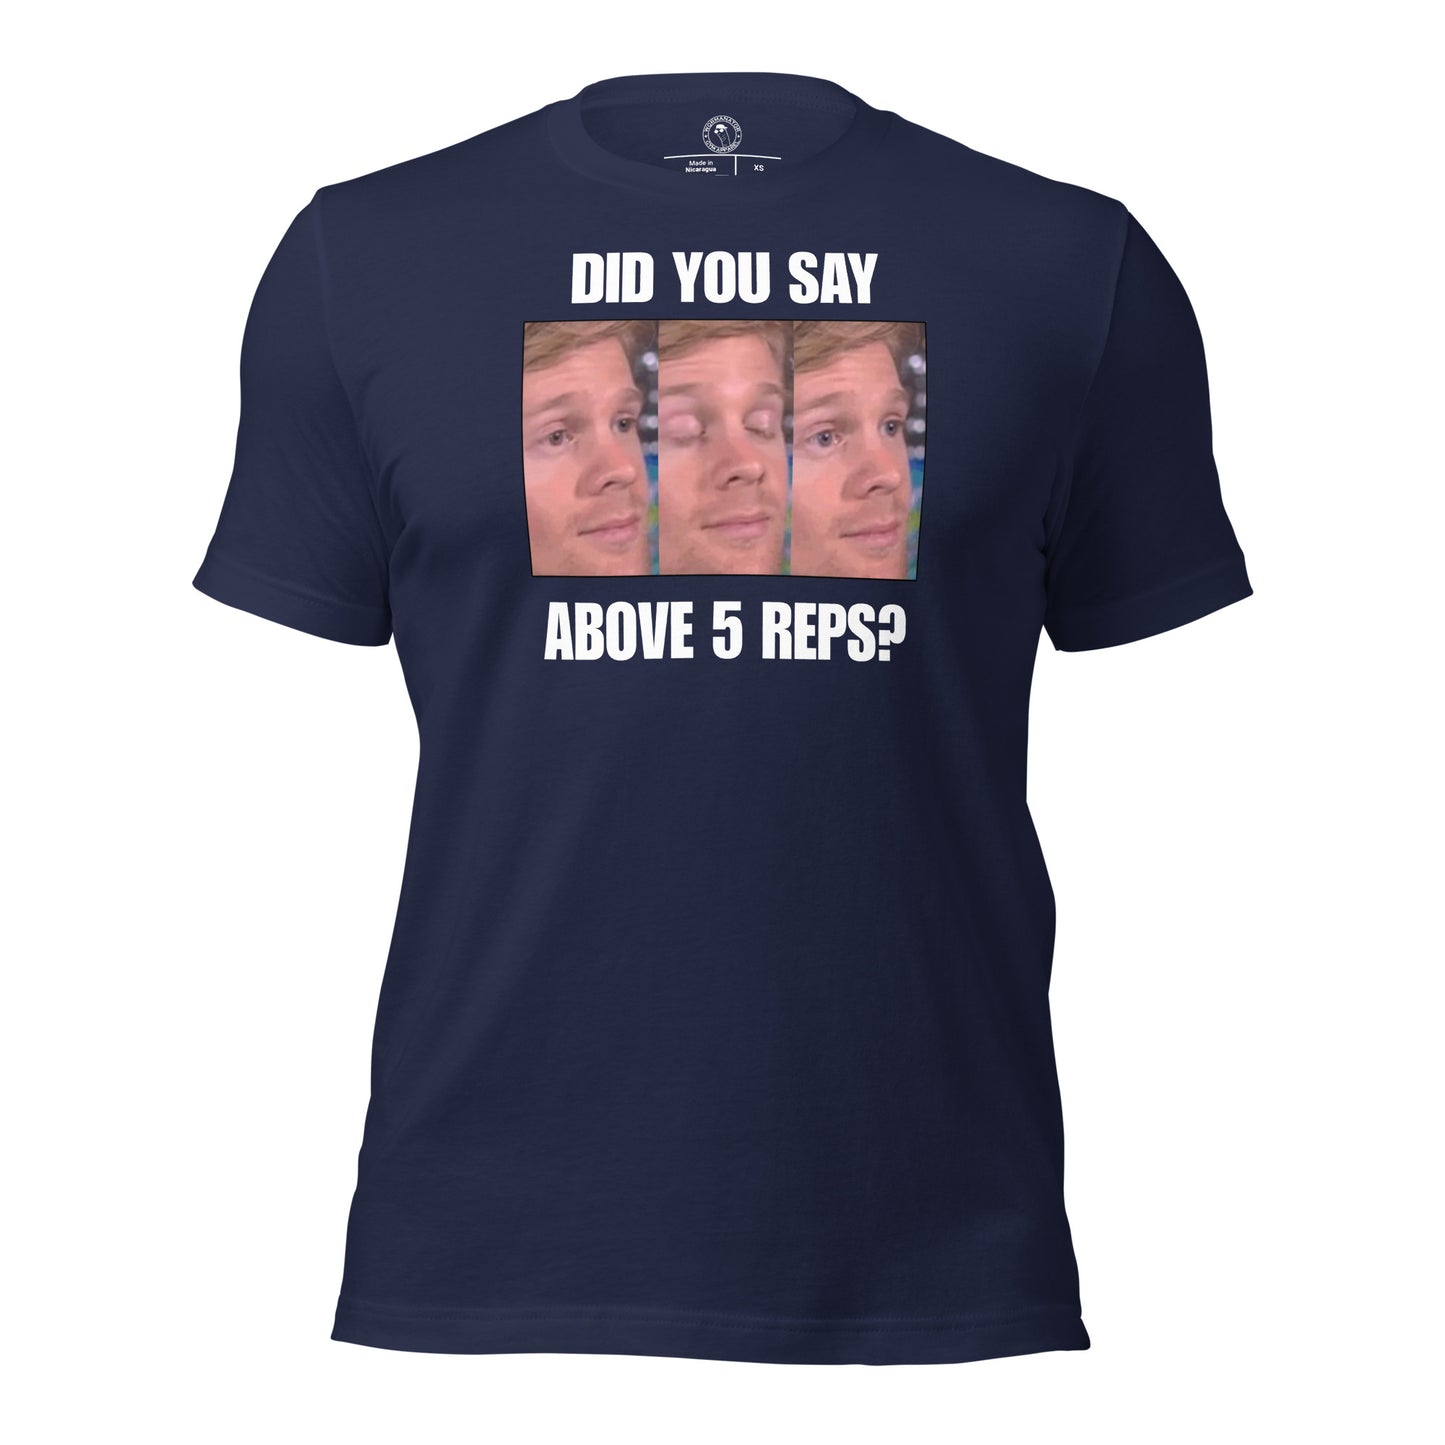 Above 5 Reps is Cardio Shirt in Navy